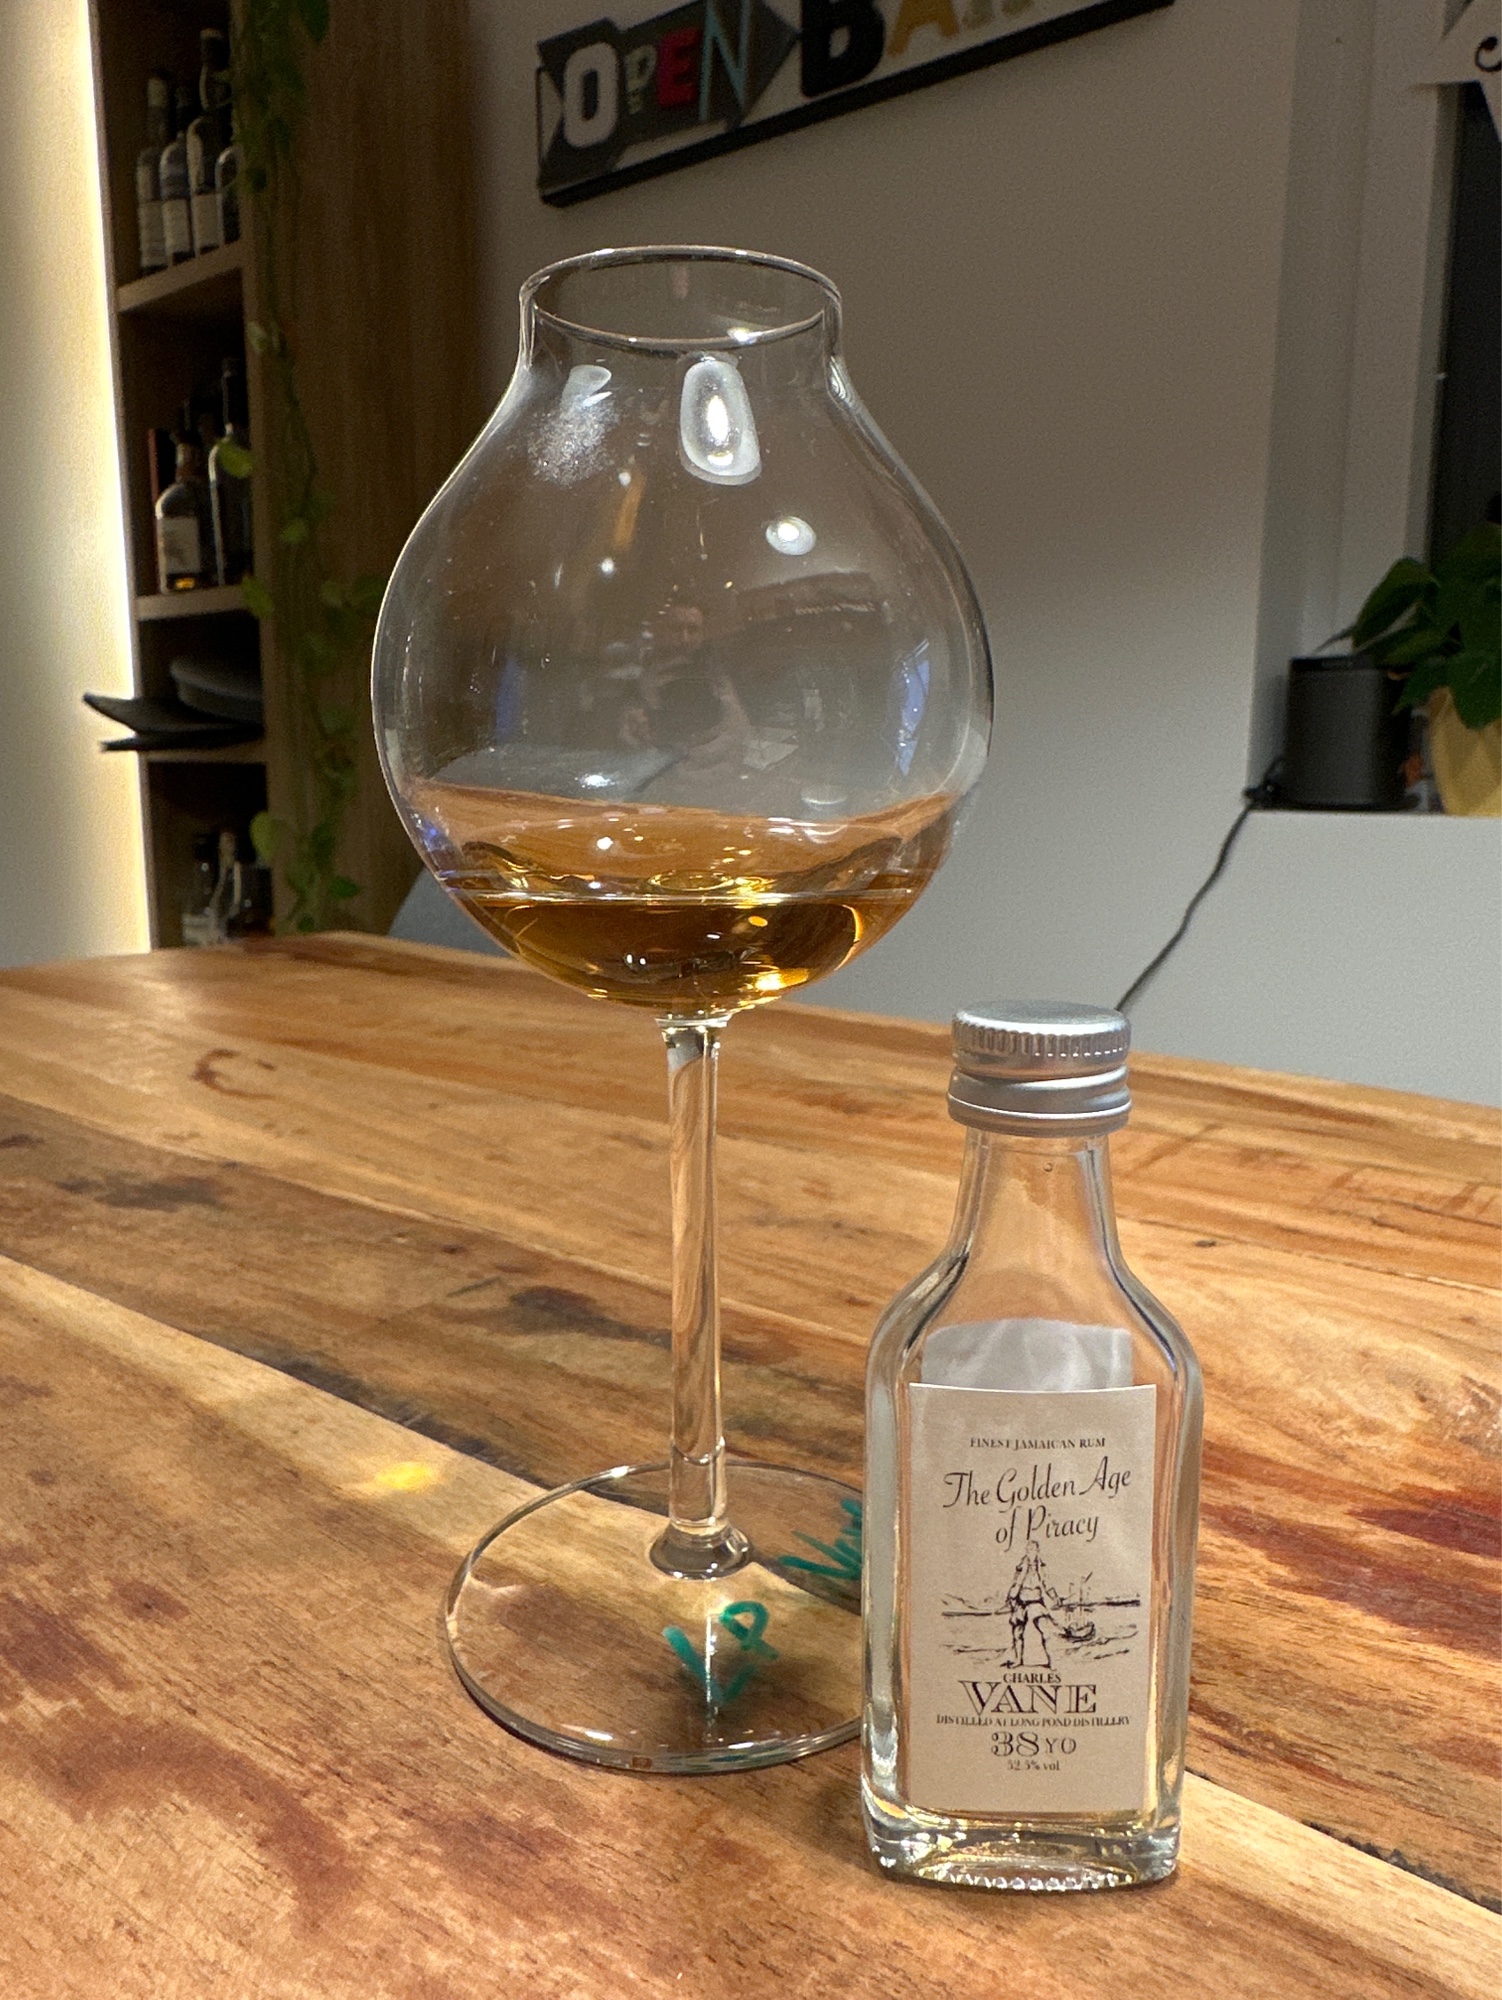 Photo of the bottle taken from user Oliver